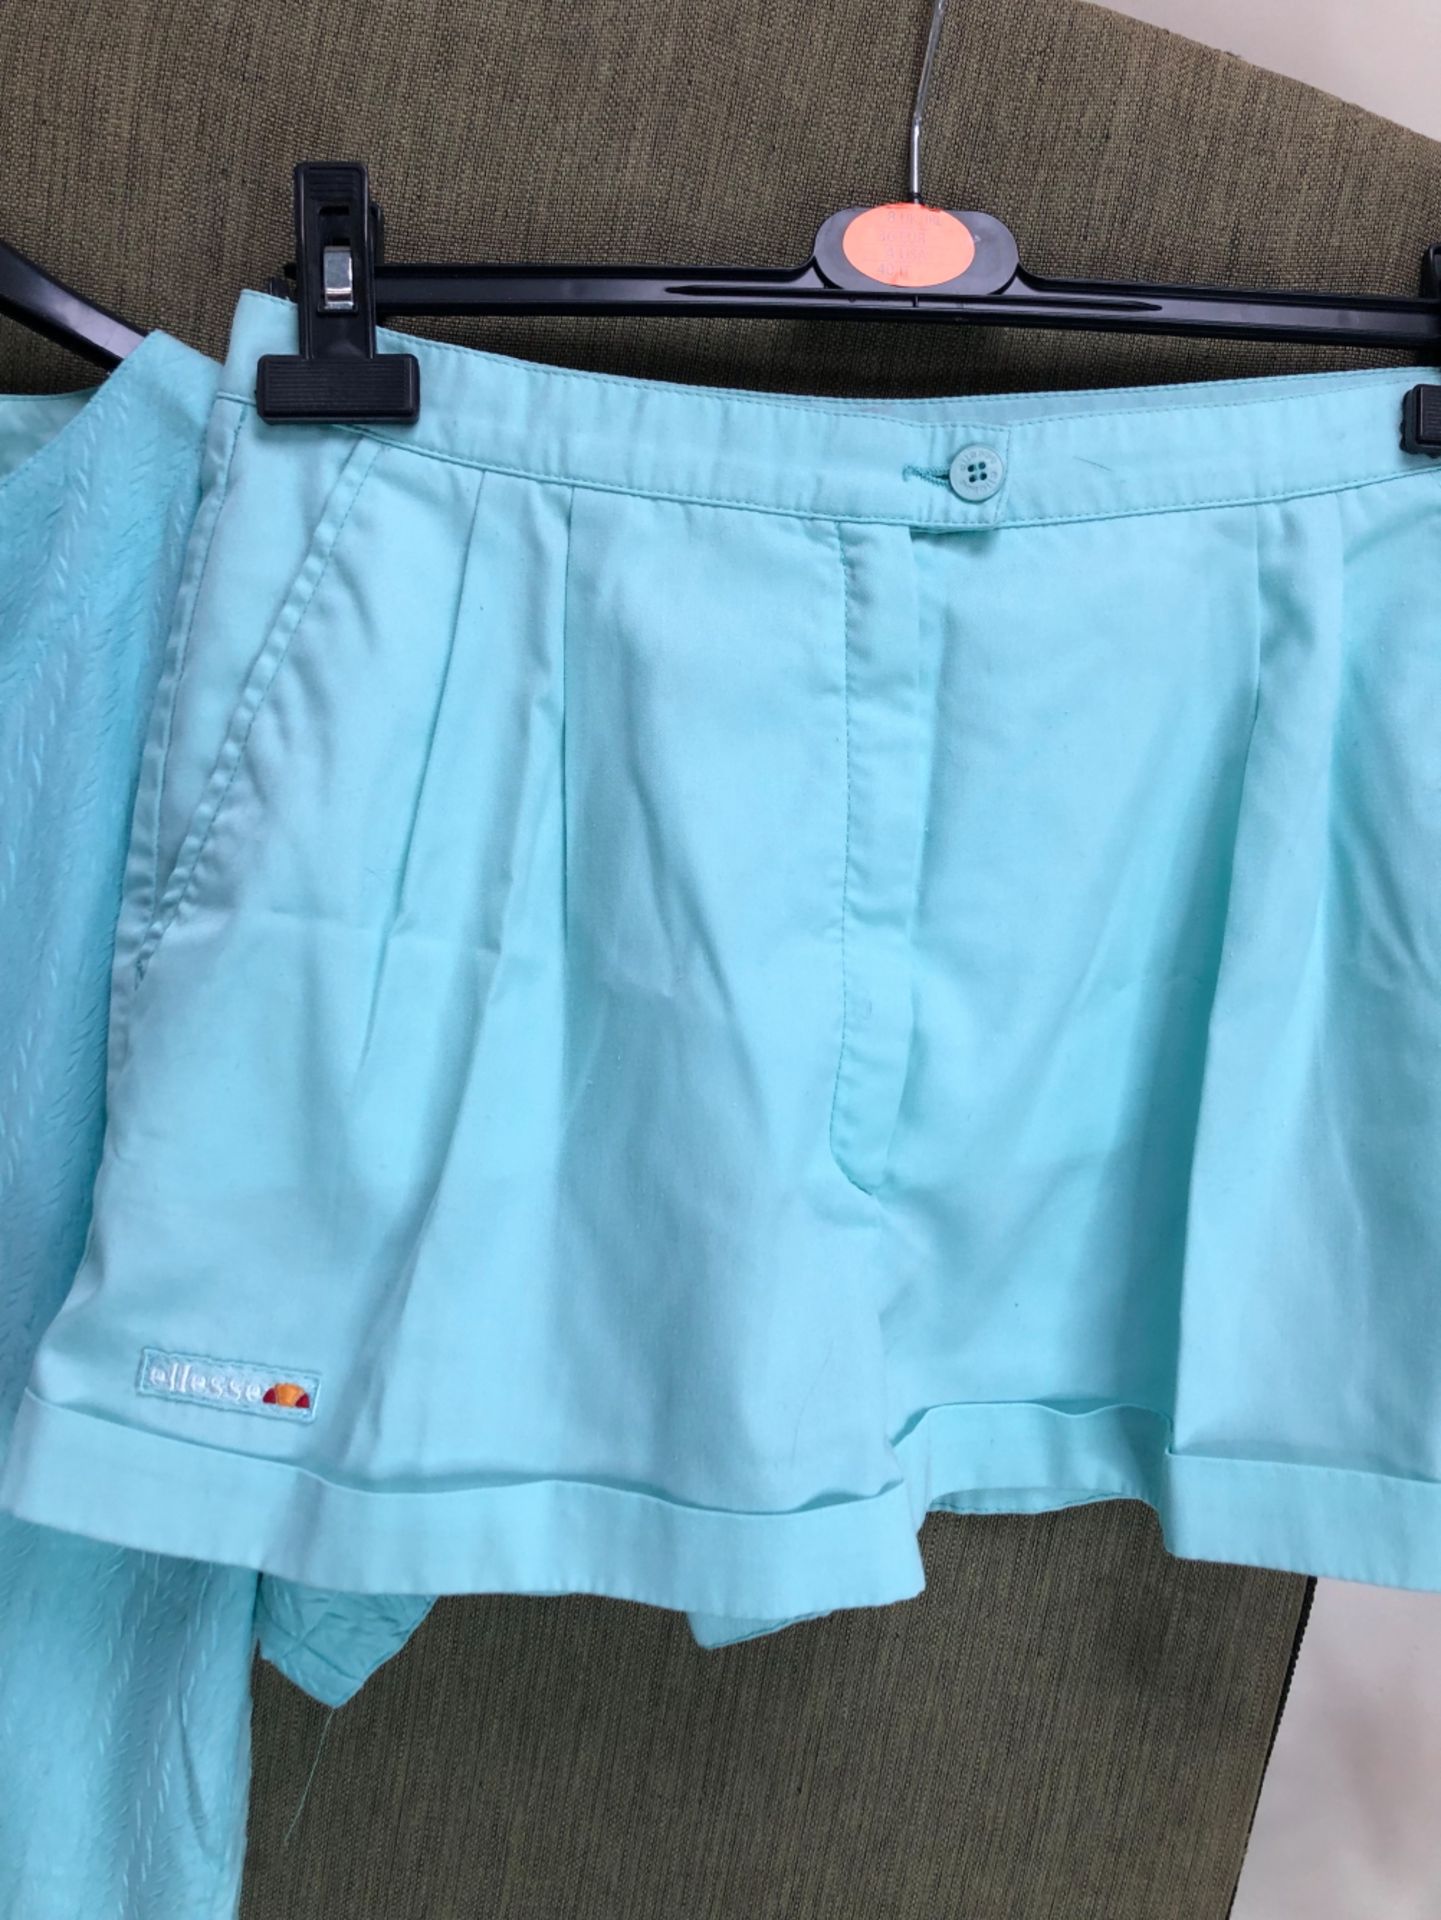 A MINT GREEN ELLESSE T-SHIRT SIZE USA 10W AND SHORTS USA 12, TOGETHER WITH A 100% COTTON MATCHING - Image 9 of 9